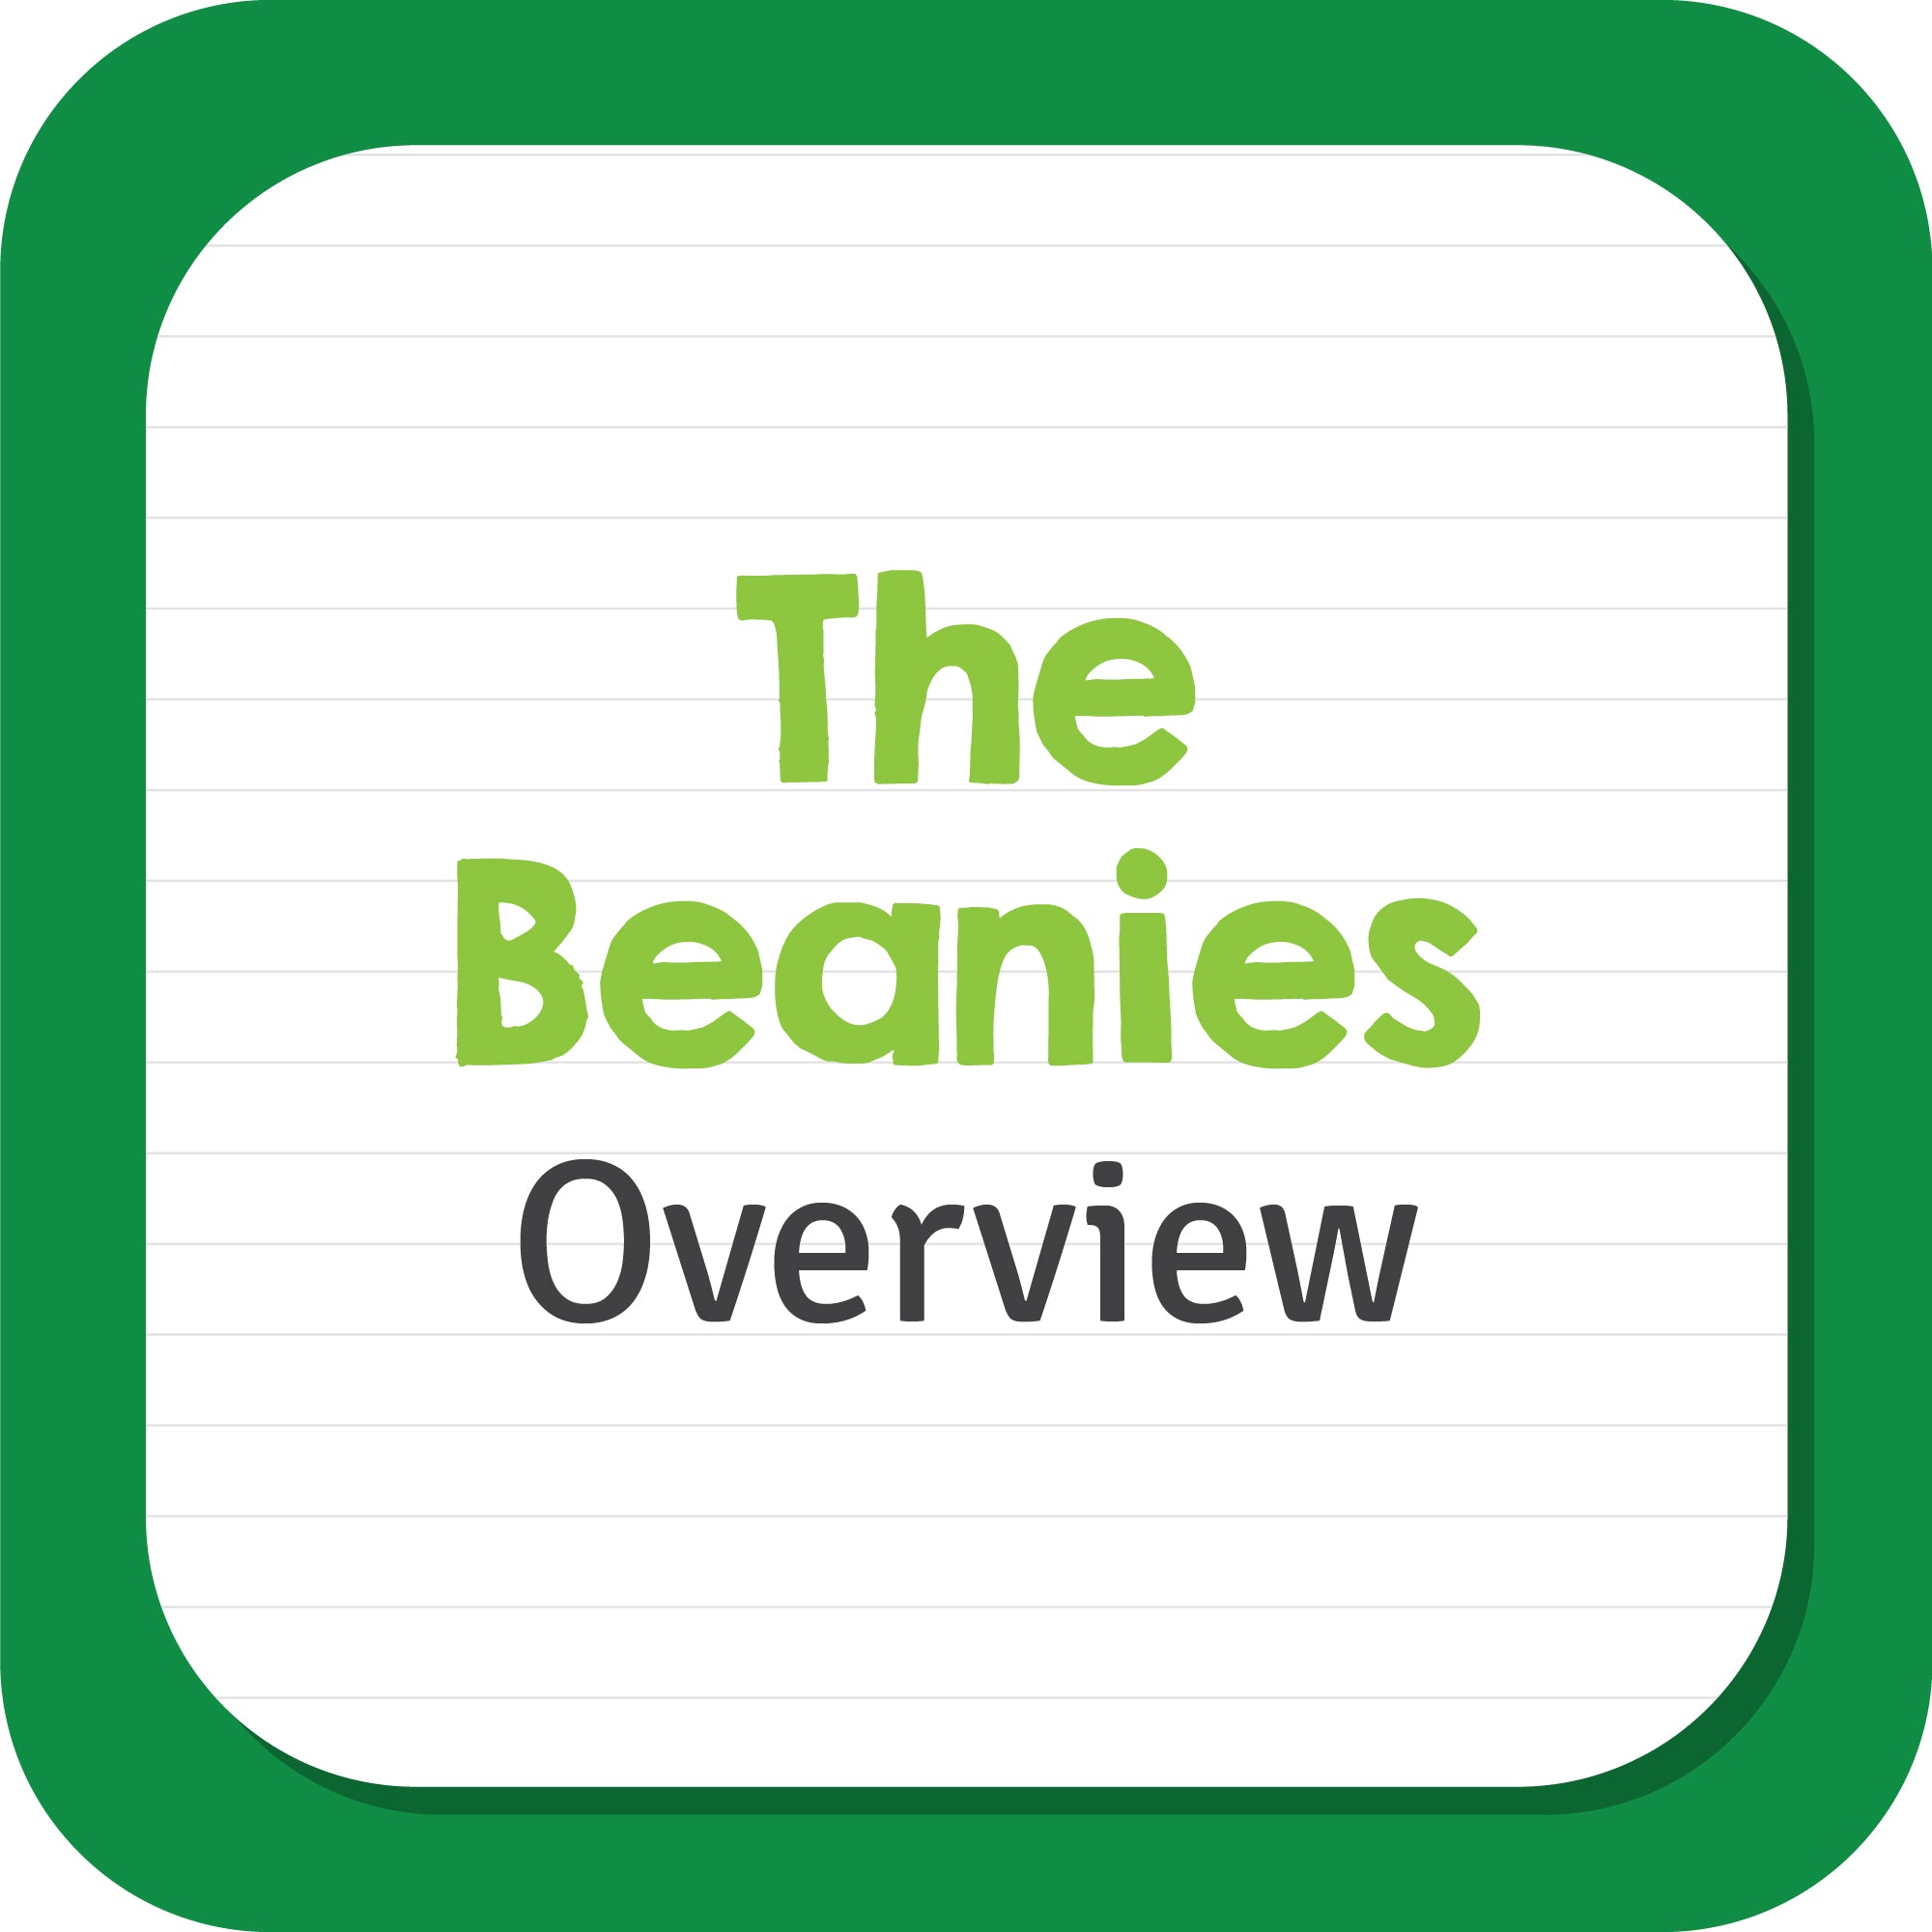 The Beanies Overview